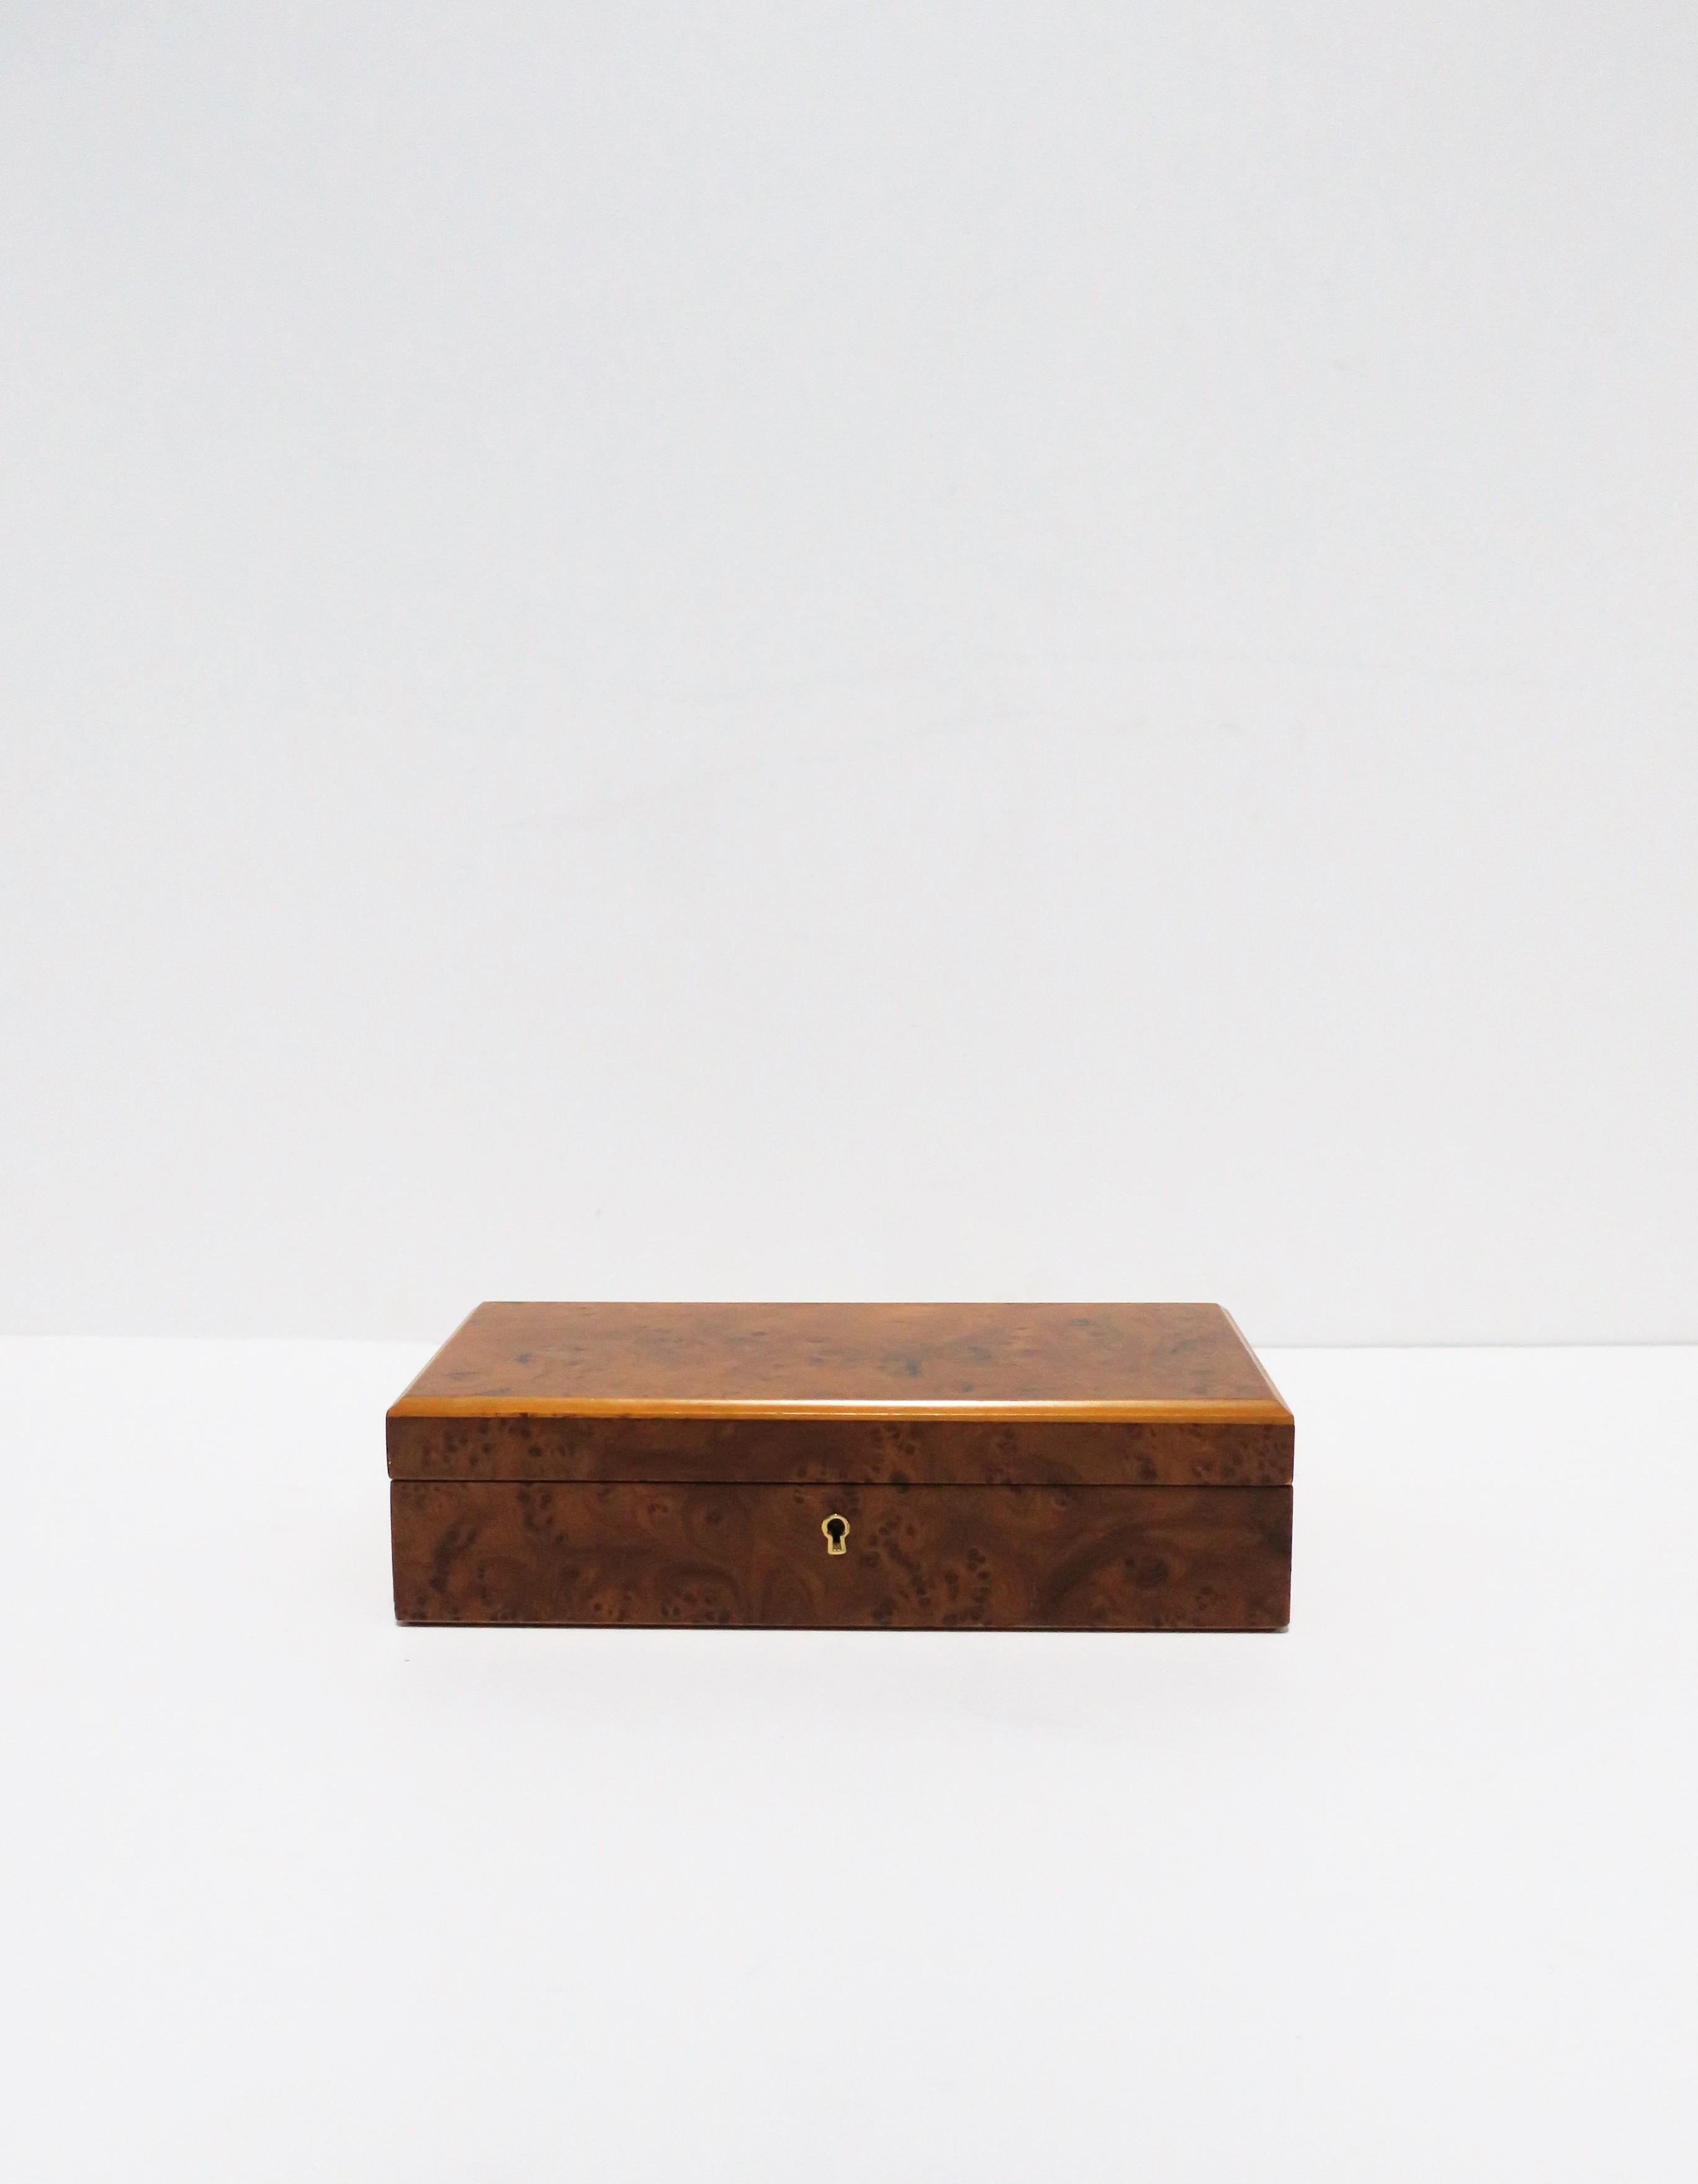 An Italian burl wood veneer jewelry box with velour interior and brass hardware, circa 20th century, 1960-1970s, Italy. Box has a nice easy open/close. Marked on bottom: 